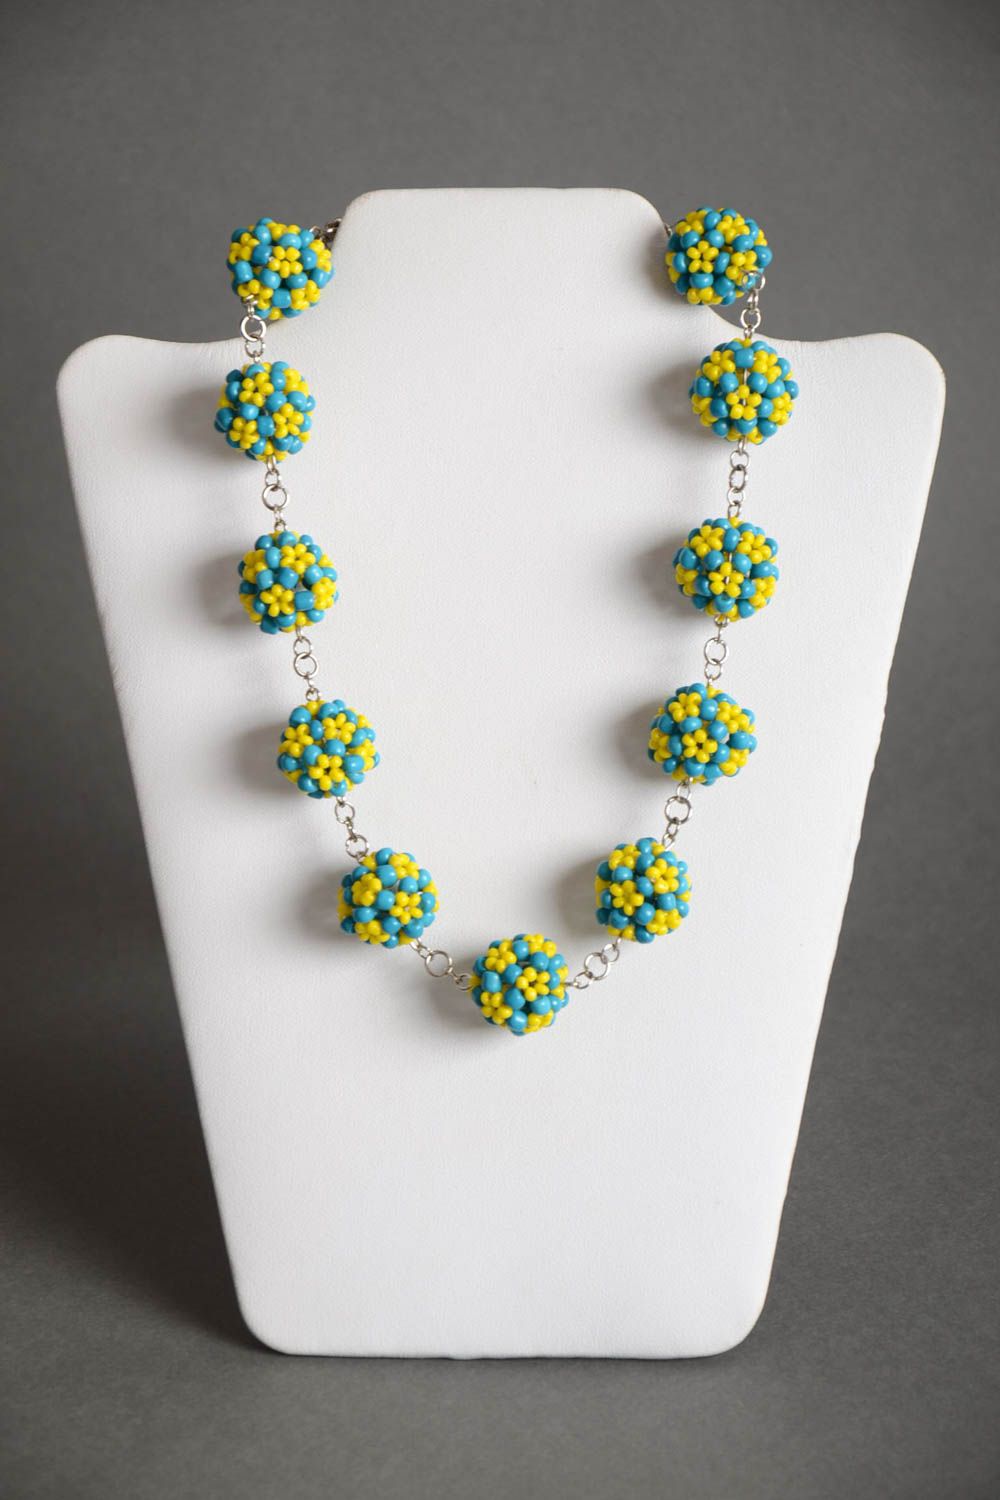 Handmade designer necklace with metal chain and bead woven blue and yellow balls photo 2